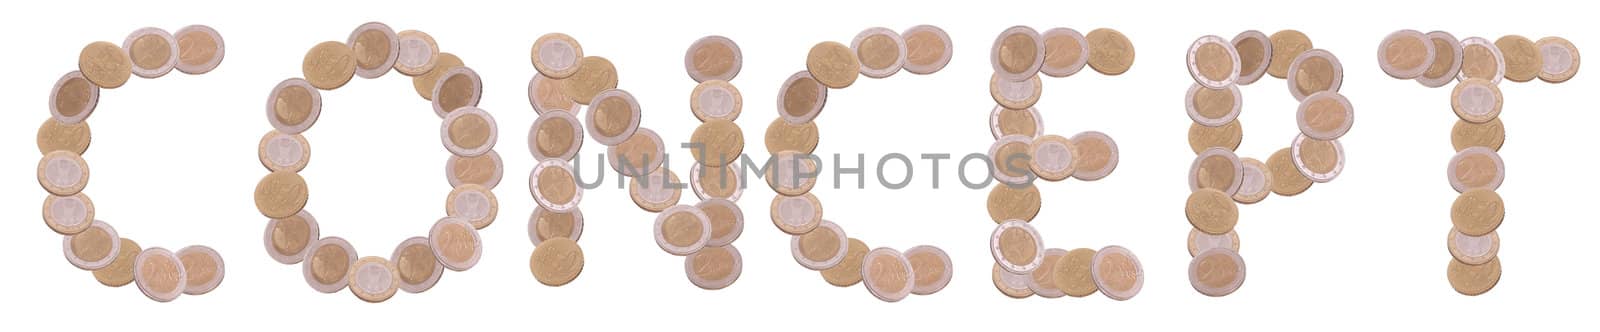 concept - written with coins on white background